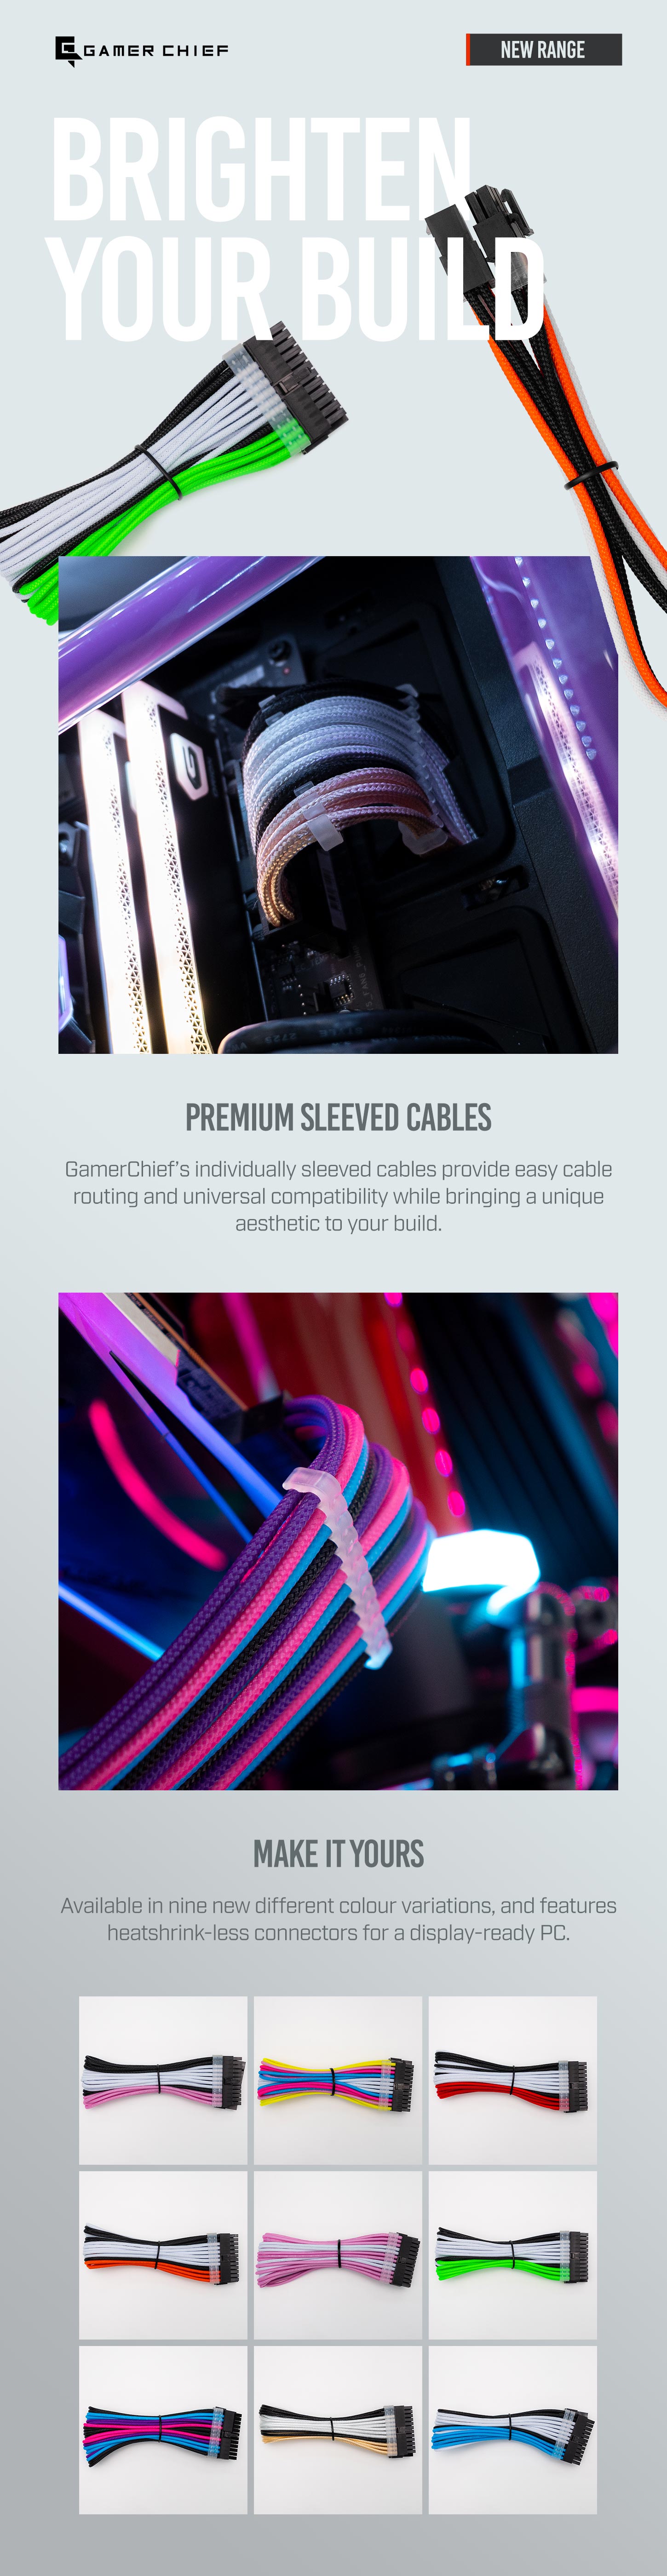 A large marketing image providing additional information about the product GamerChief Elite Series 8-Pin EPS 30cm Sleeved Extension Cable (Pink/White/Black) - Additional alt info not provided